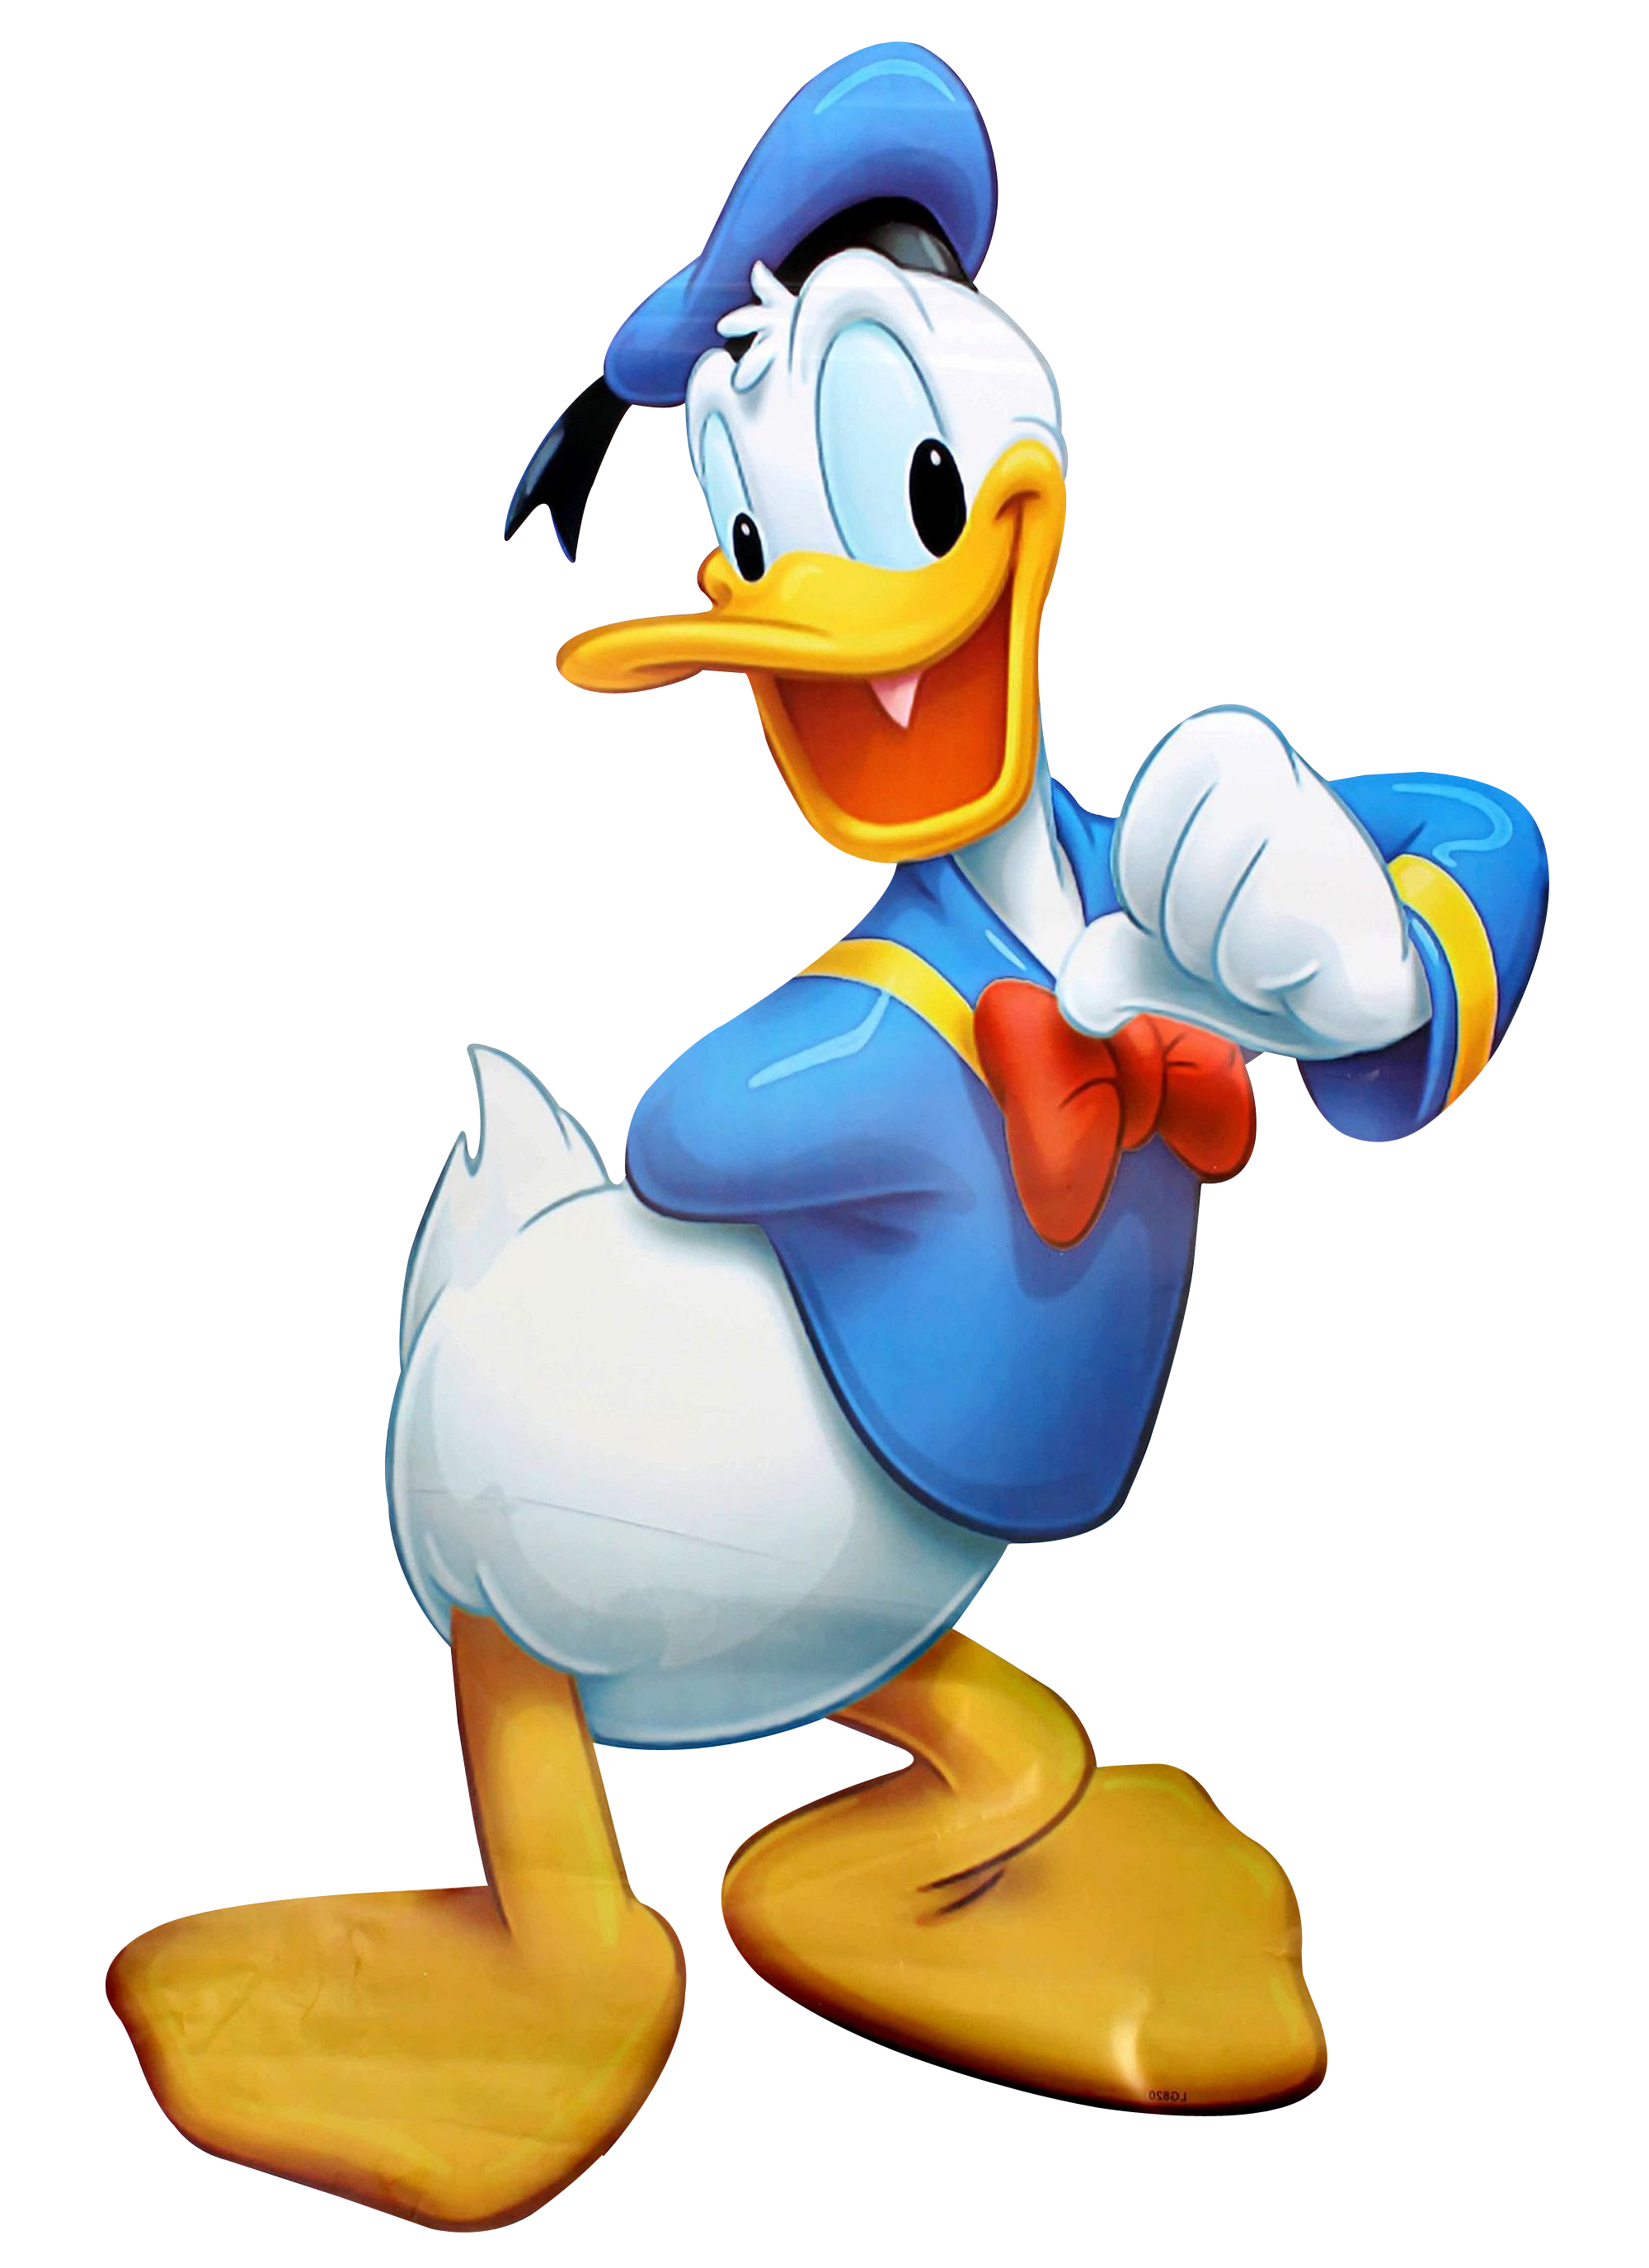 https://static.wikia.nocookie.net/charactercommunity/images/2/2f/Donald_duck_PNG58.png/revision/latest?cb=20200318183947